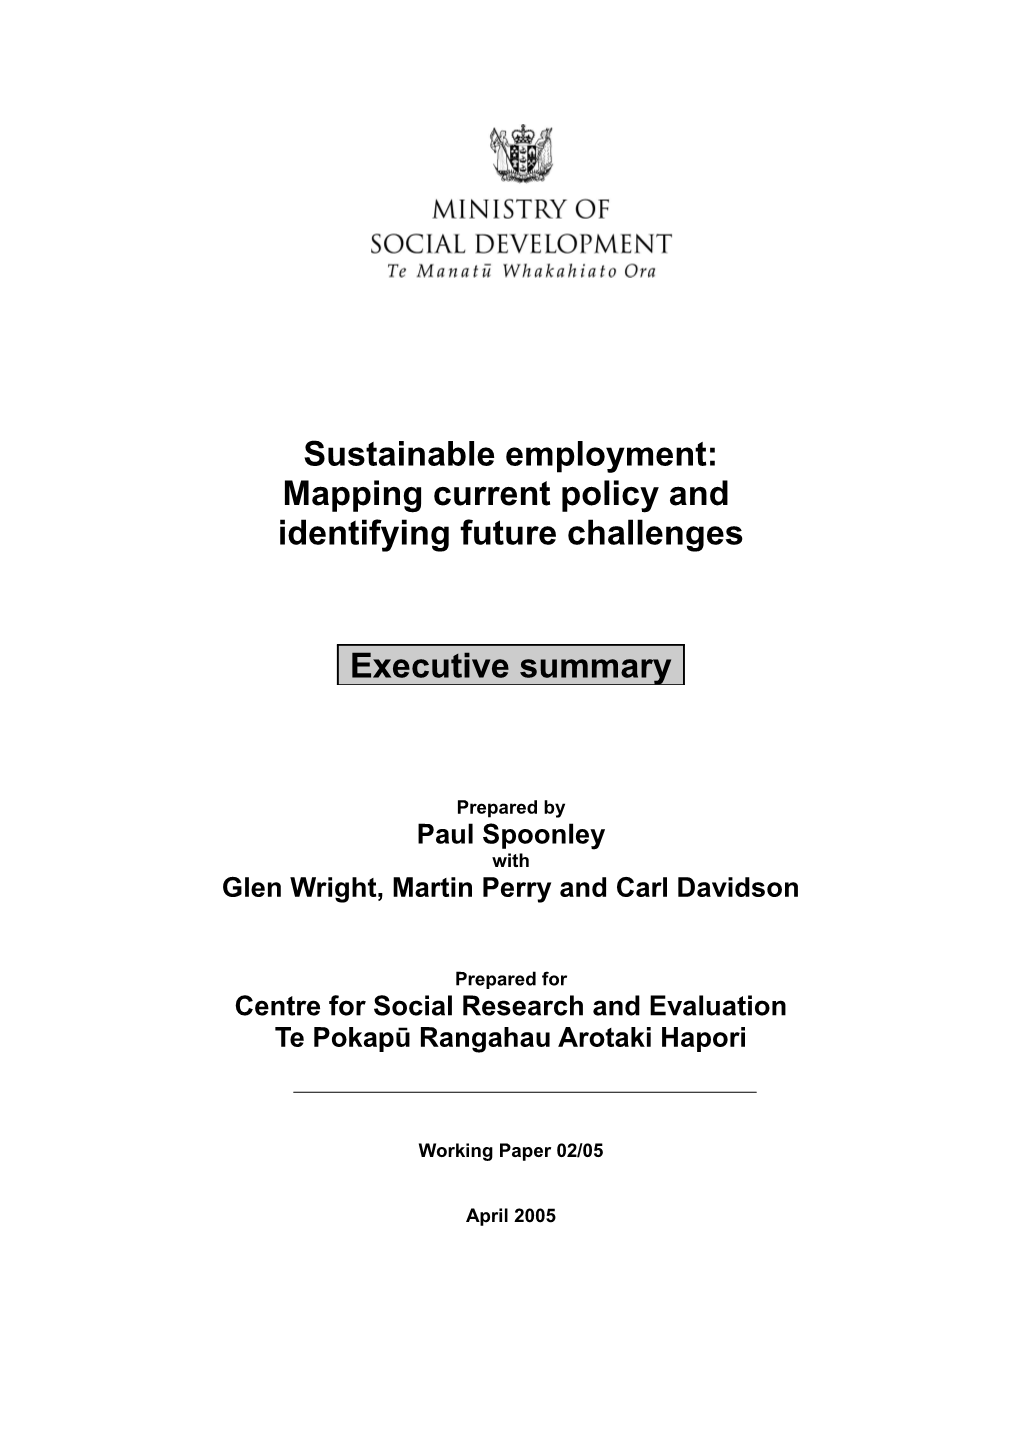 Sustainable Employment: Mapping Current Policy and Identifying Future Challenges